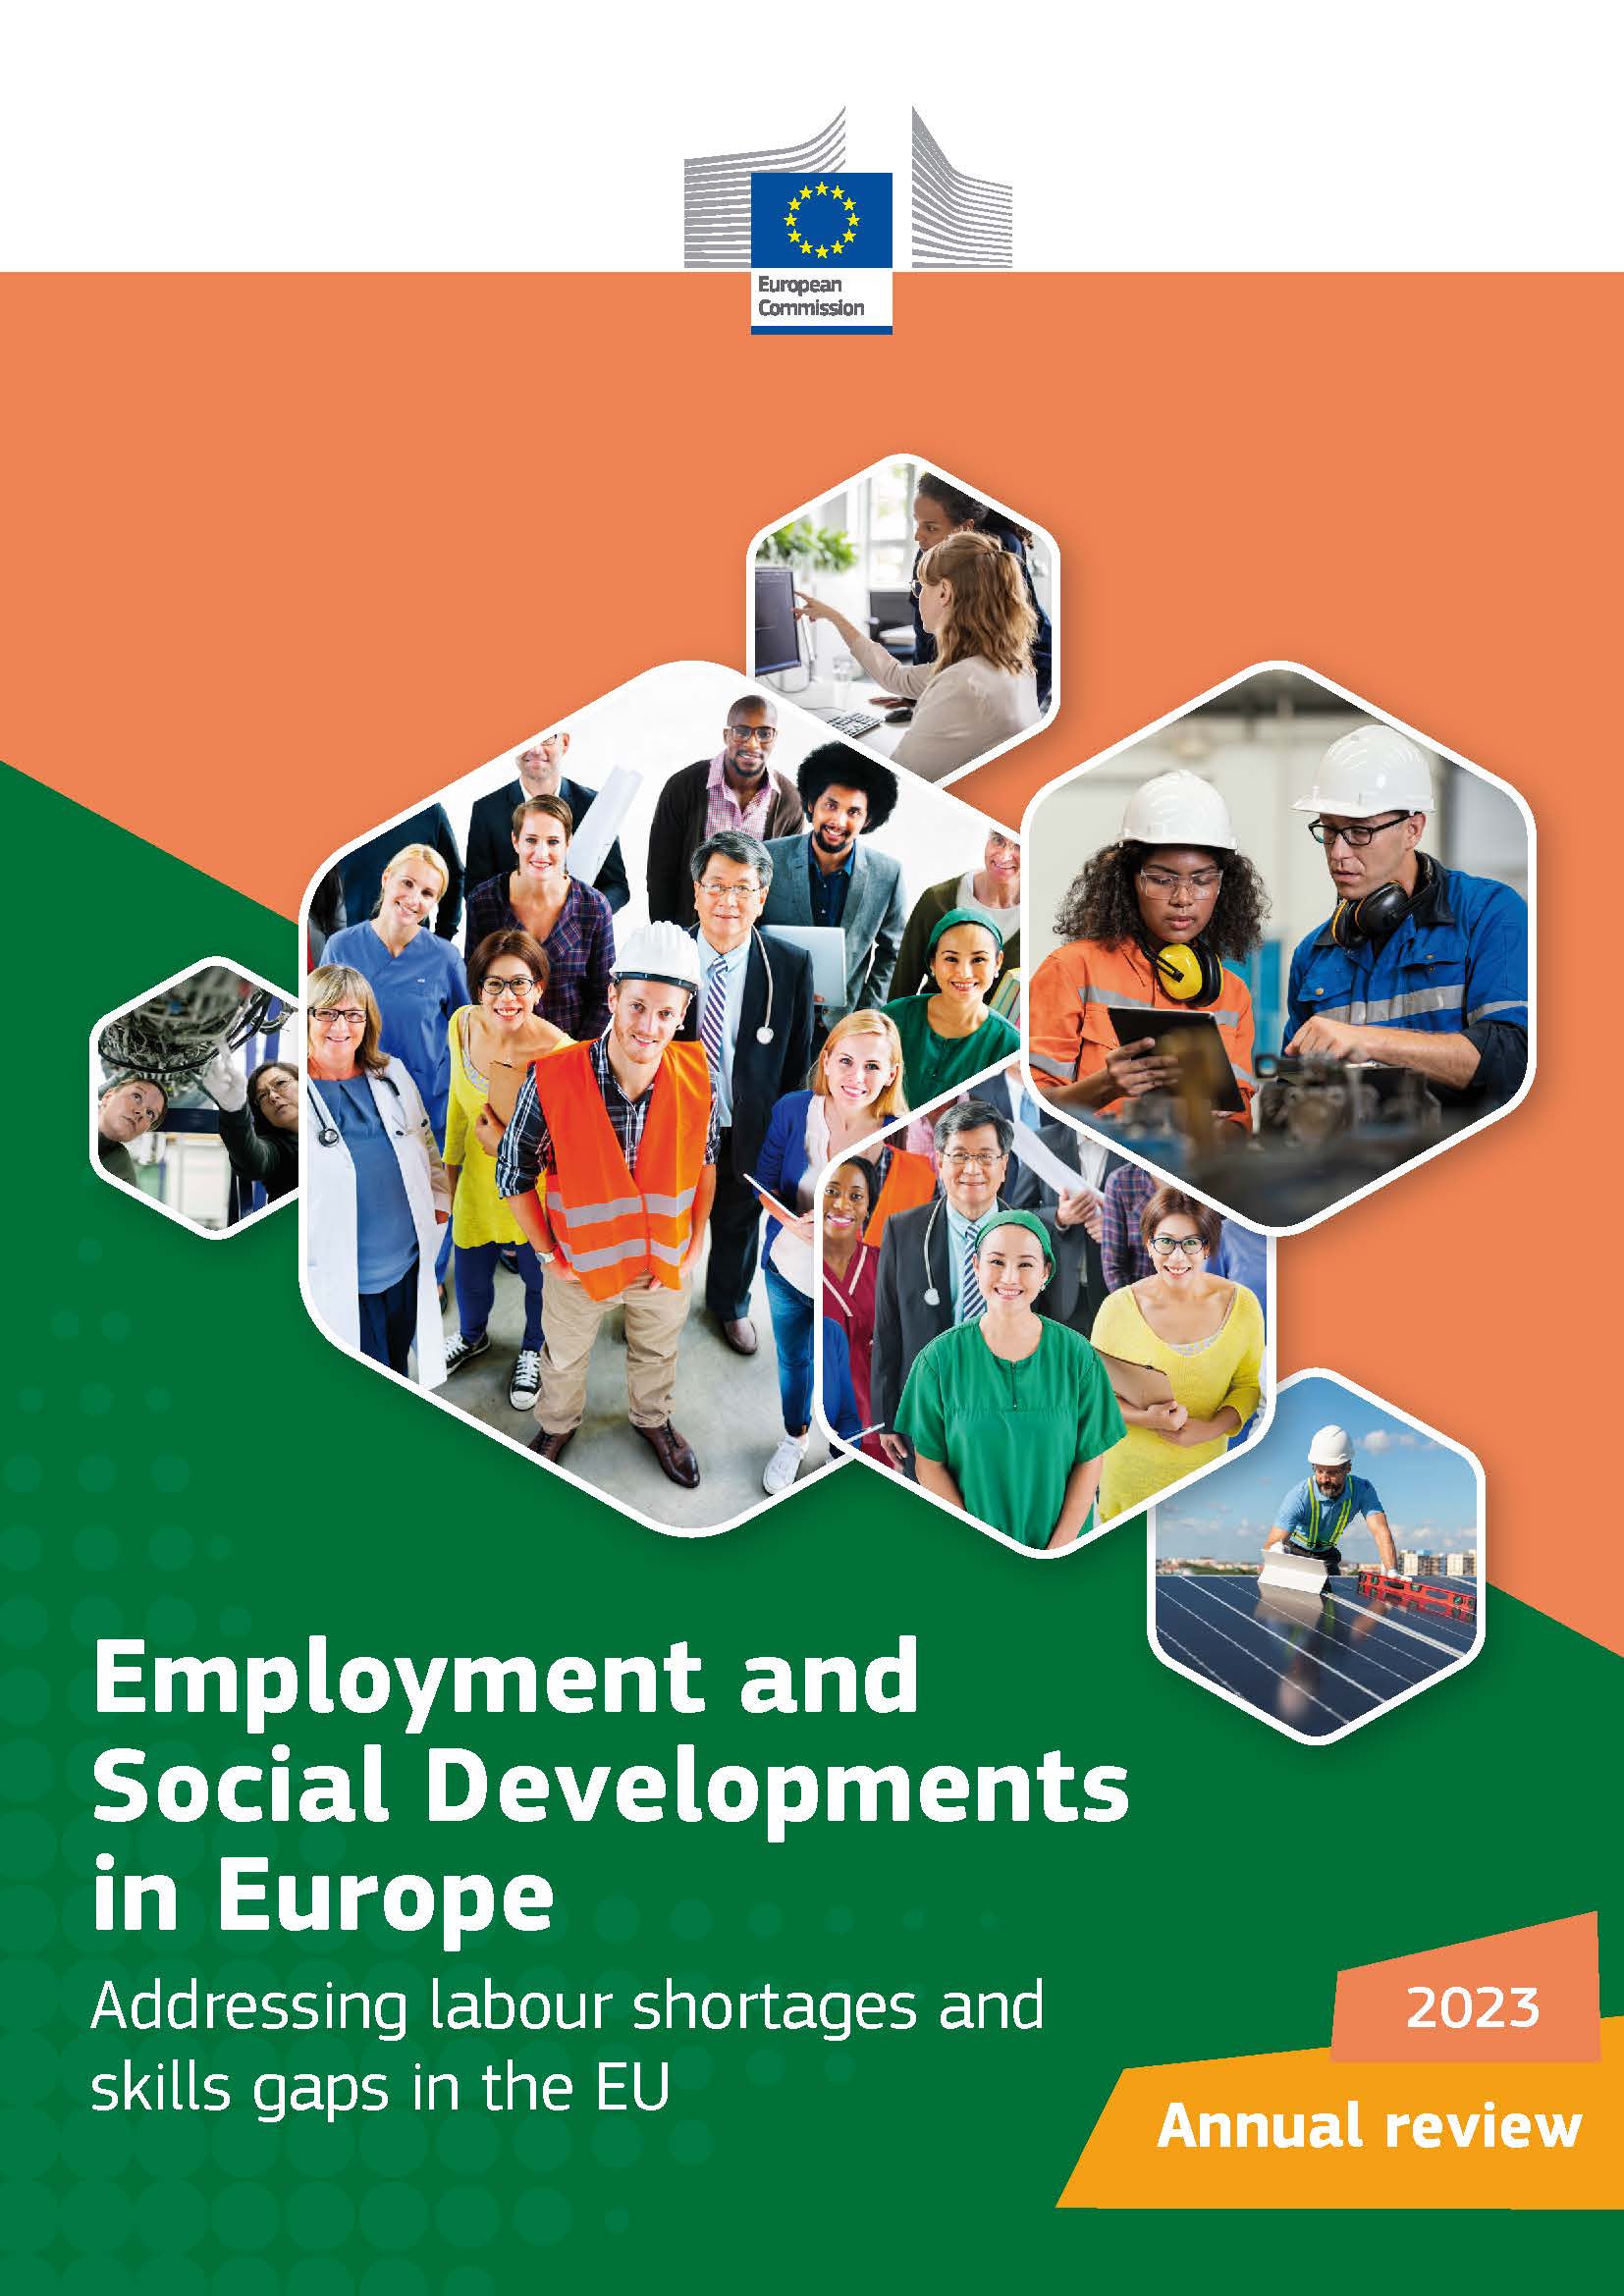 Employment and Social Developments in Europe 2023